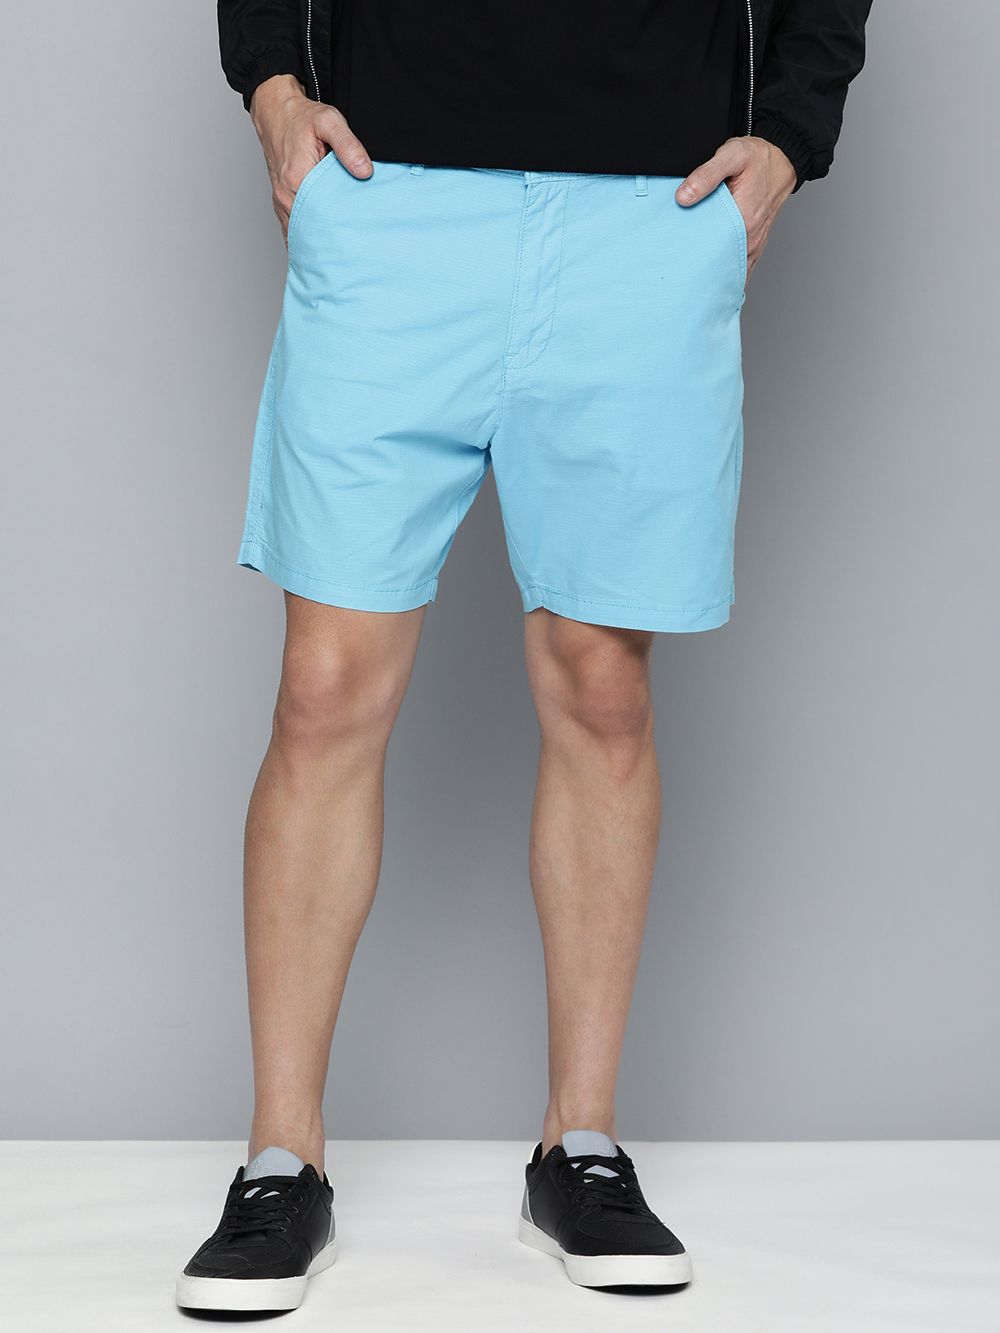 Levis Men Blue Solid Chino Shorts